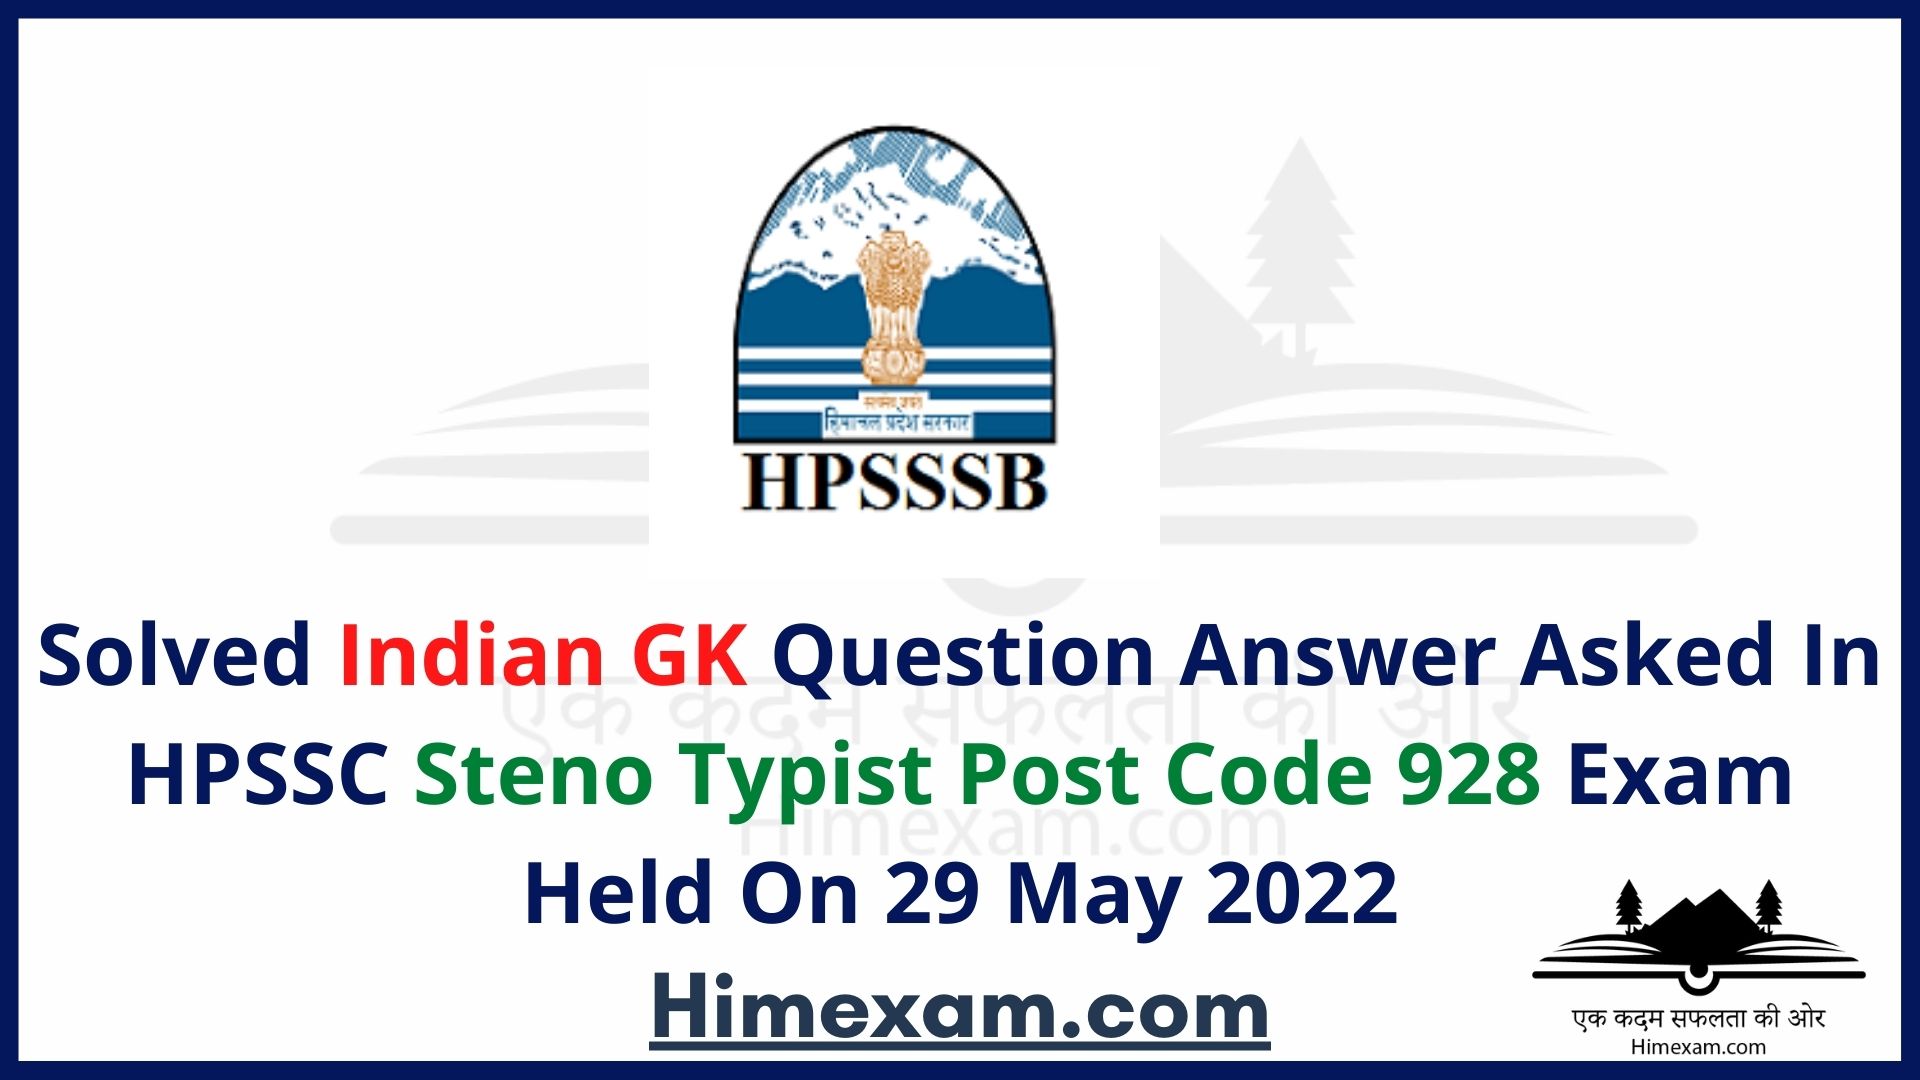 Solved Indian GK Question Answer Asked In HPSSC Steno Typist Post Code 928 Exam Held On 29 May 2022